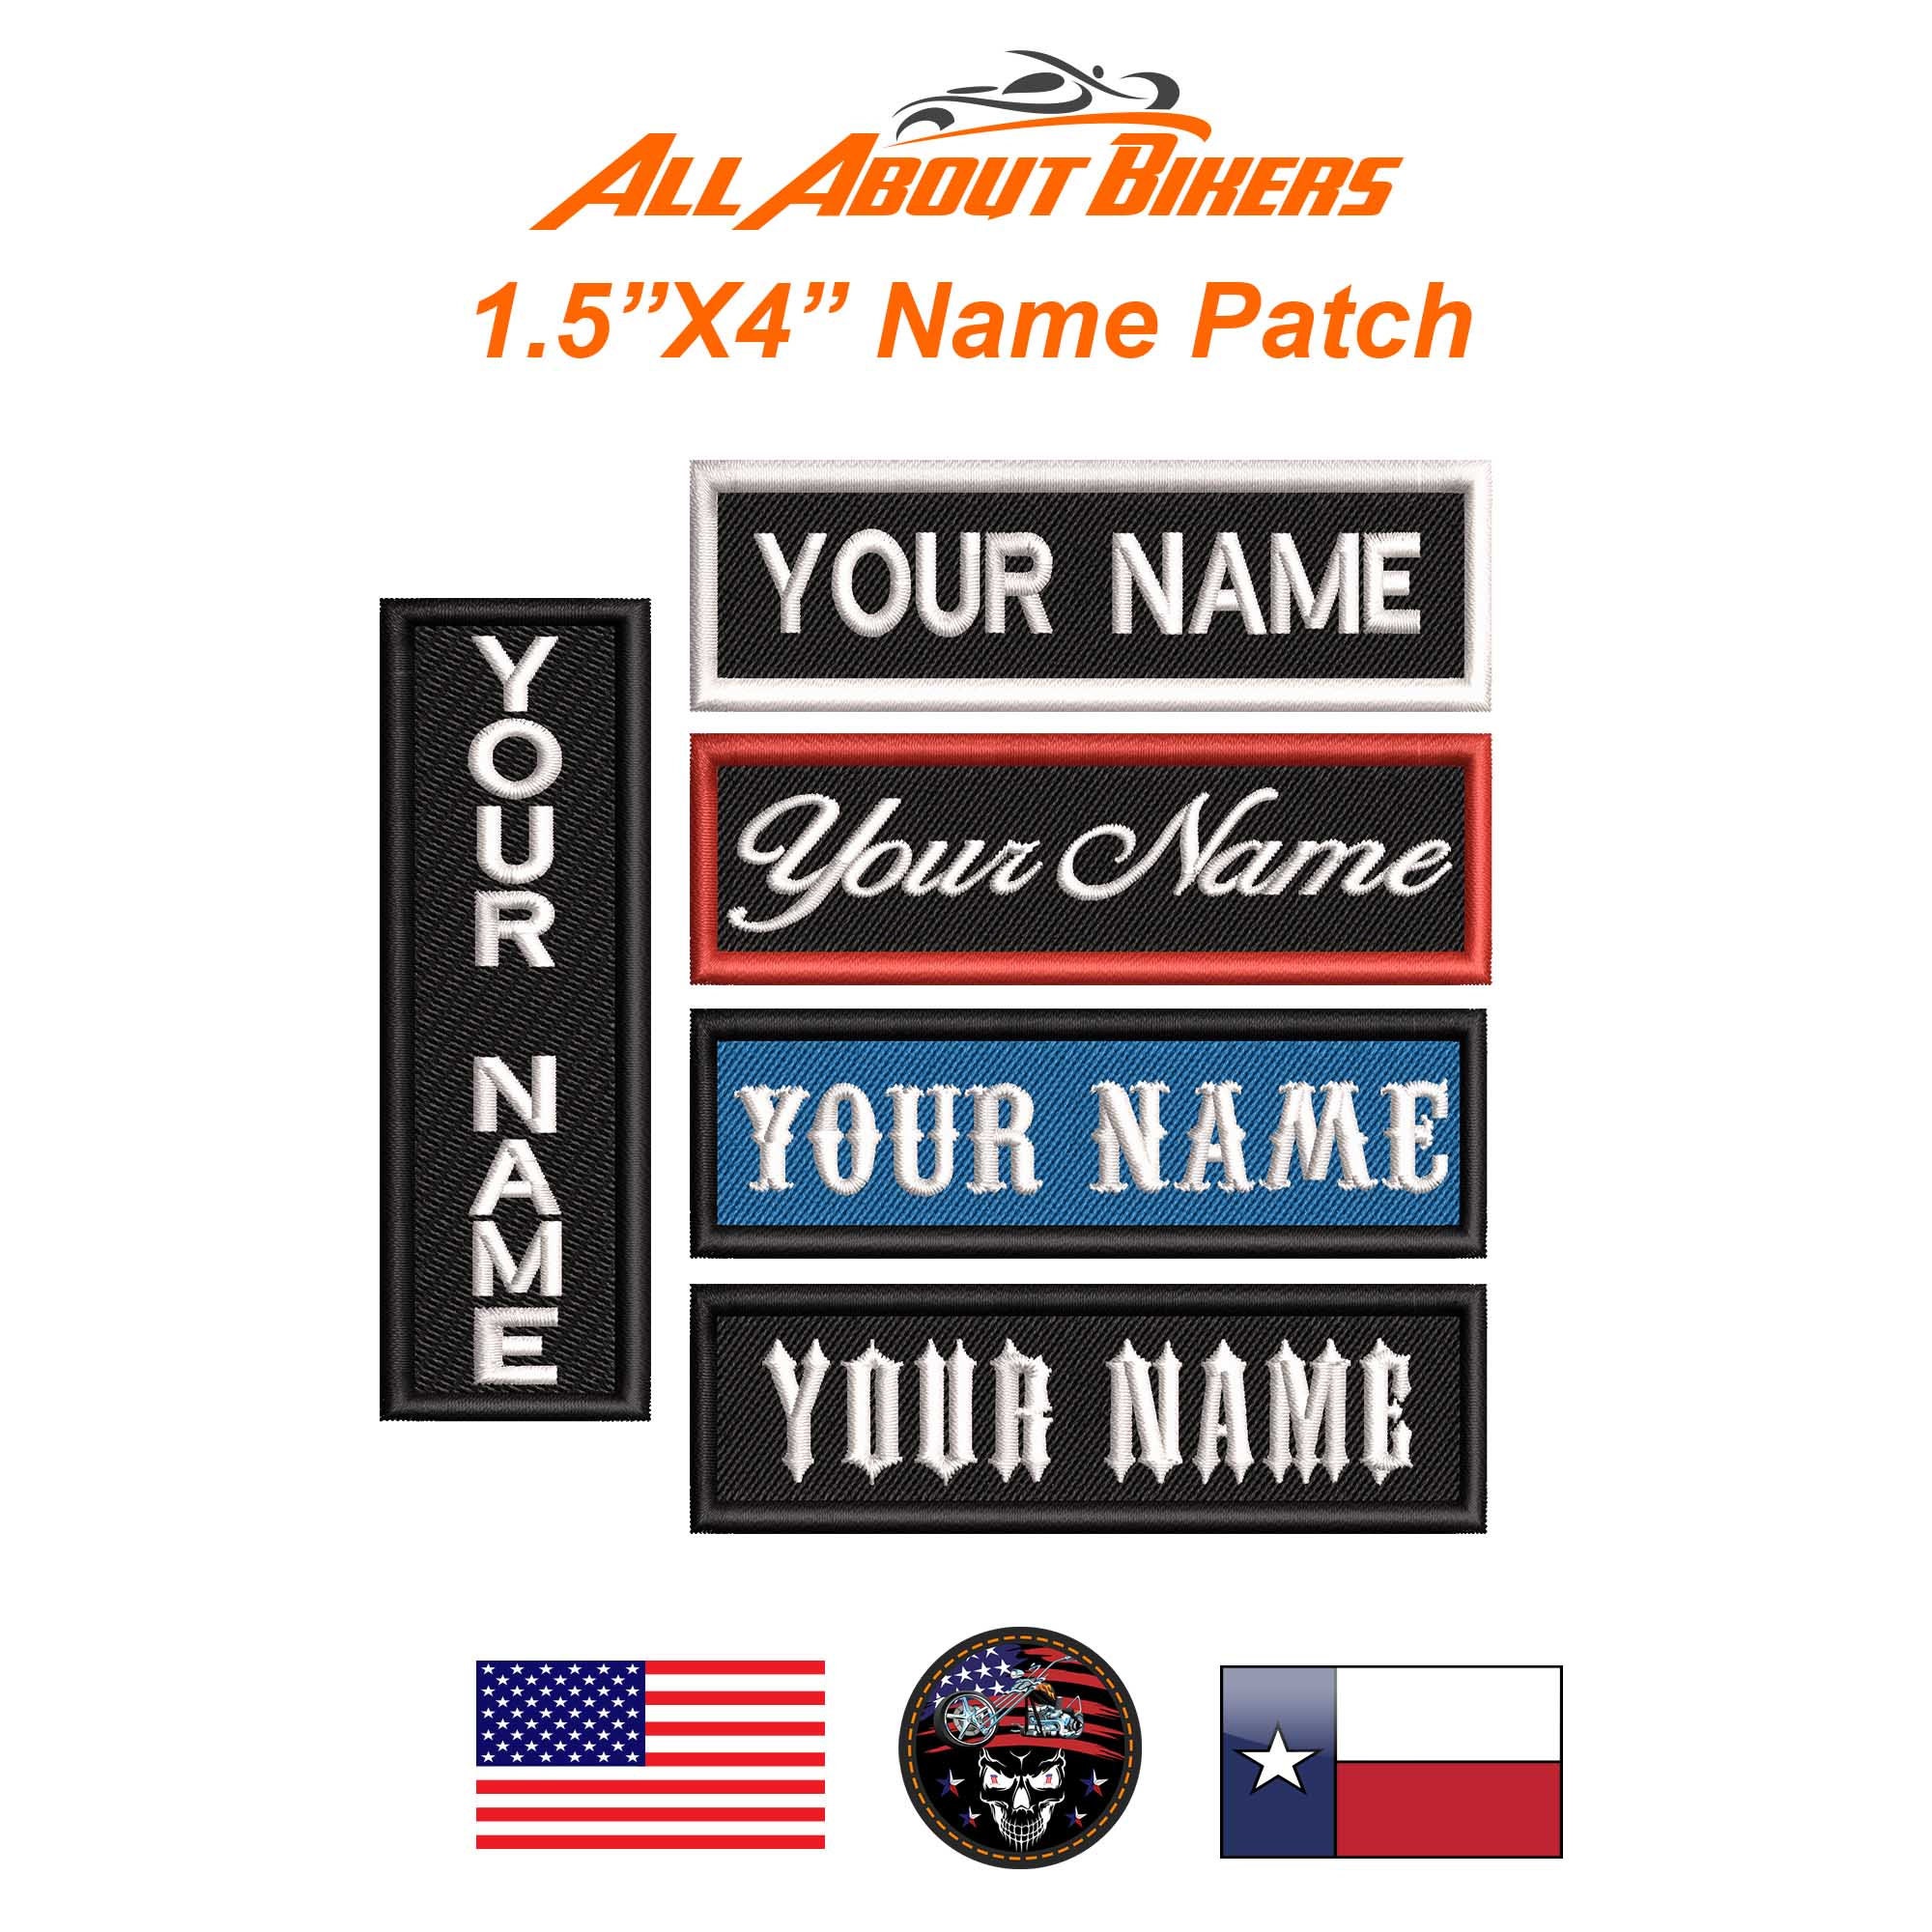 Blank Name Tag Patch Gray Border  Embroidered Patches by Ivamis Patches